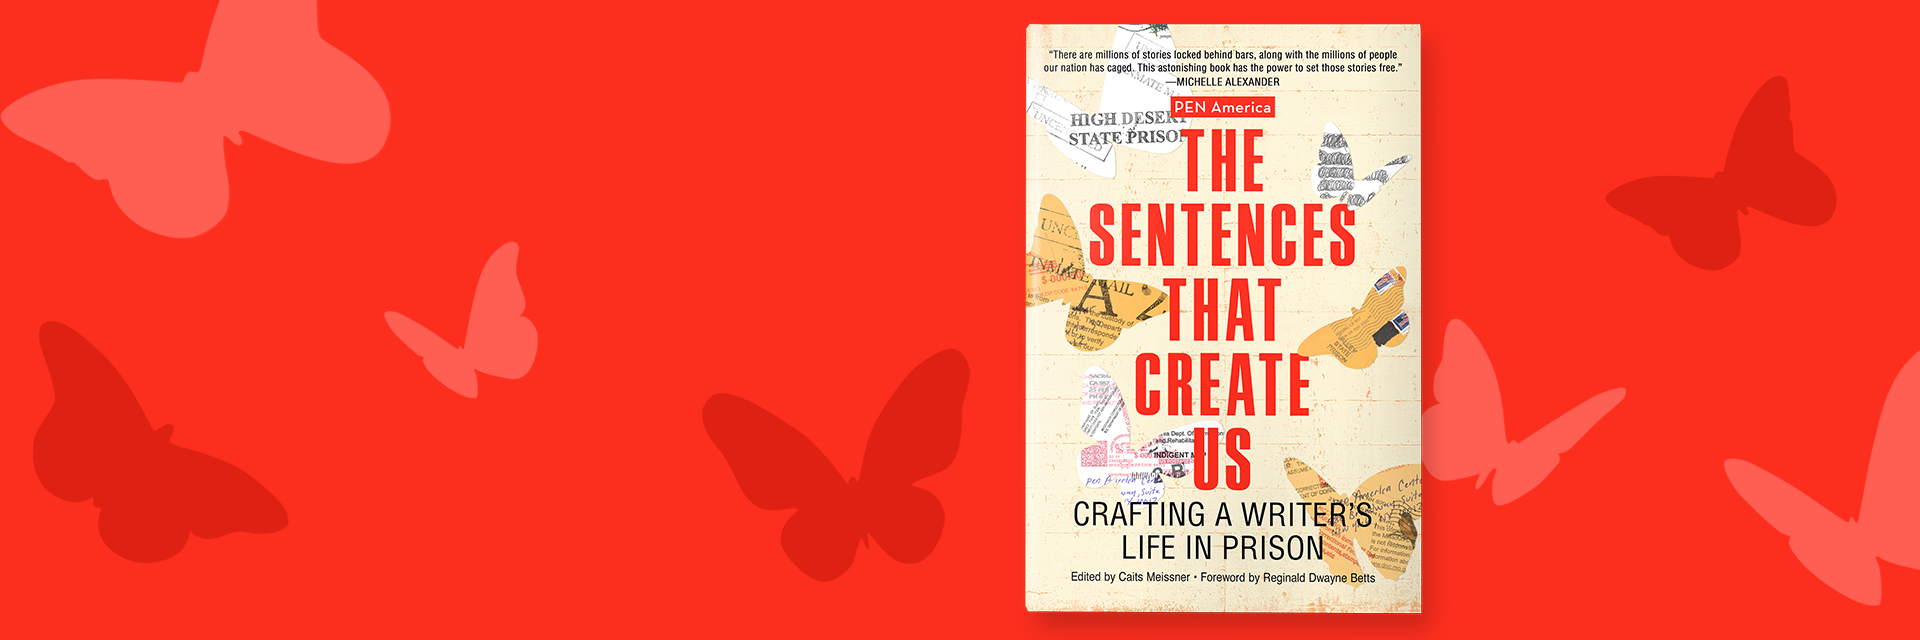 The Sentences That Create Us book cover with butterflies overlaid on an orange background